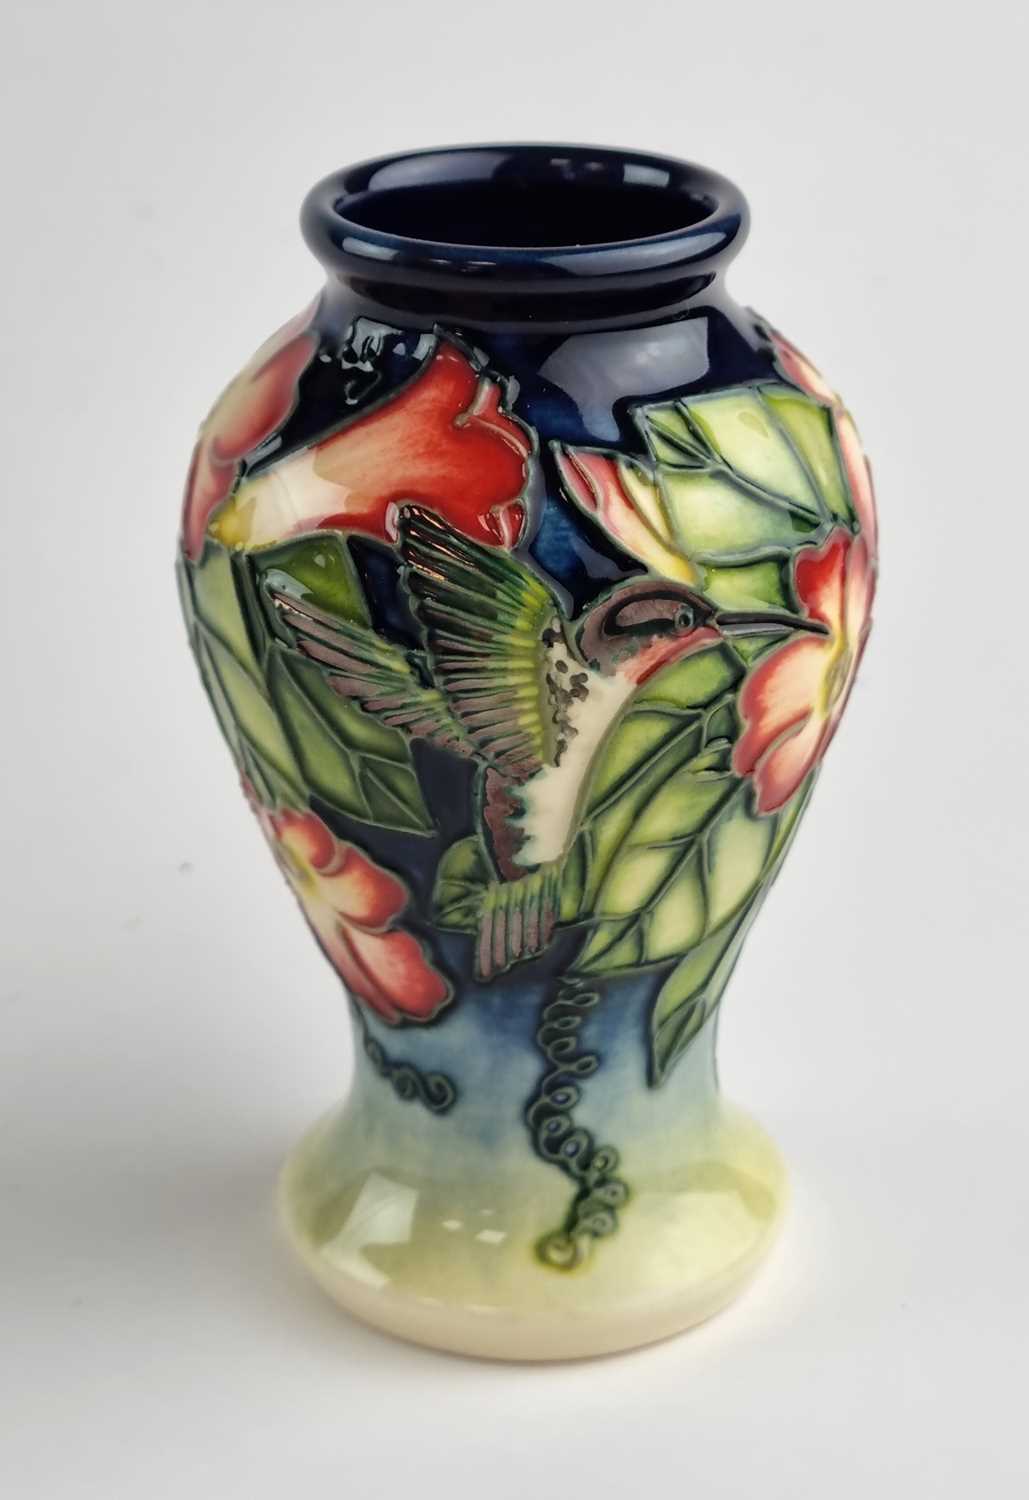 Lot A small Moorcroft vase in the Hummingbird pattern designed by Anji Davenport